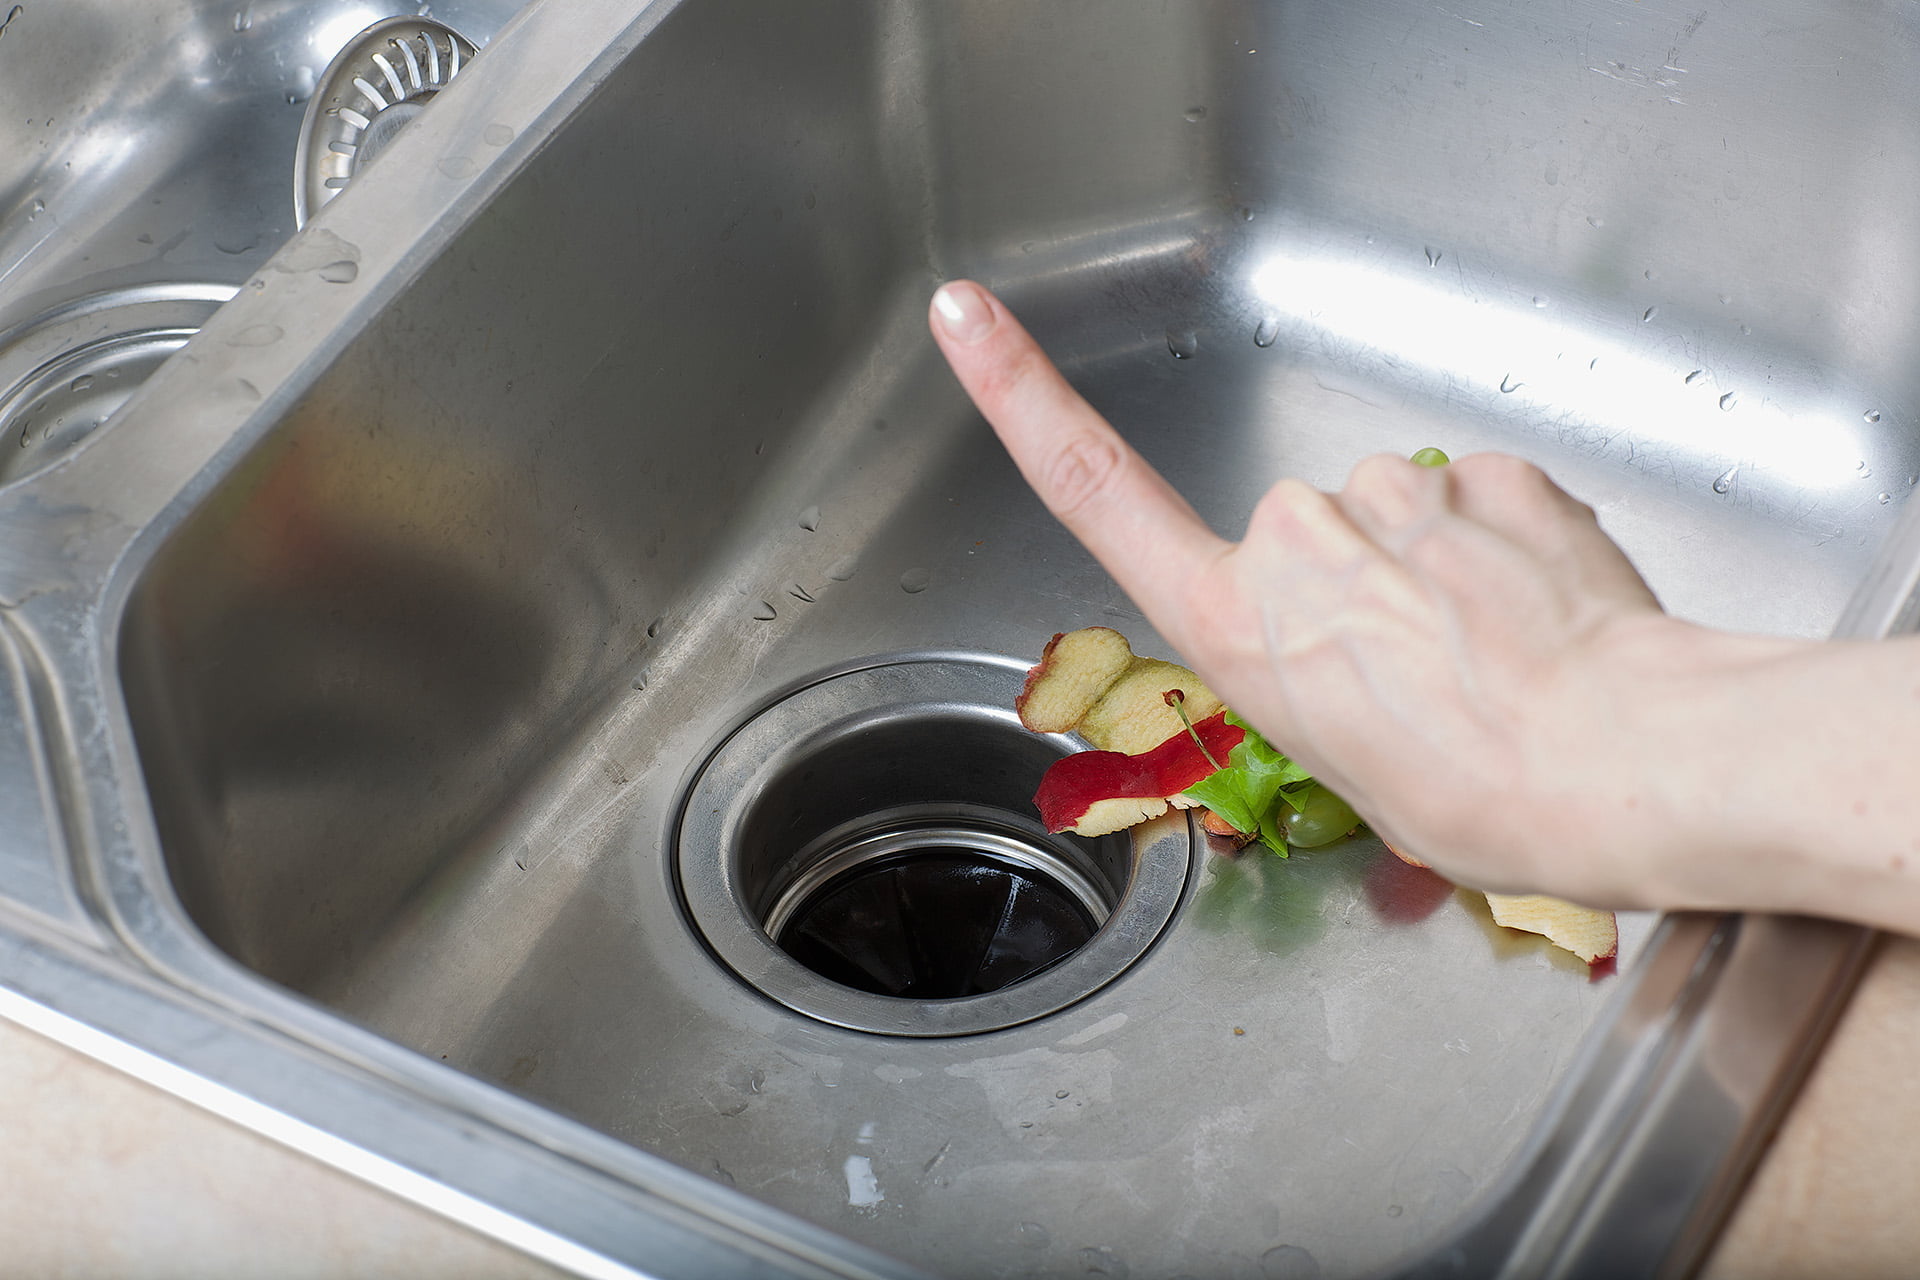 How To Properly Use A Garbage Disposal